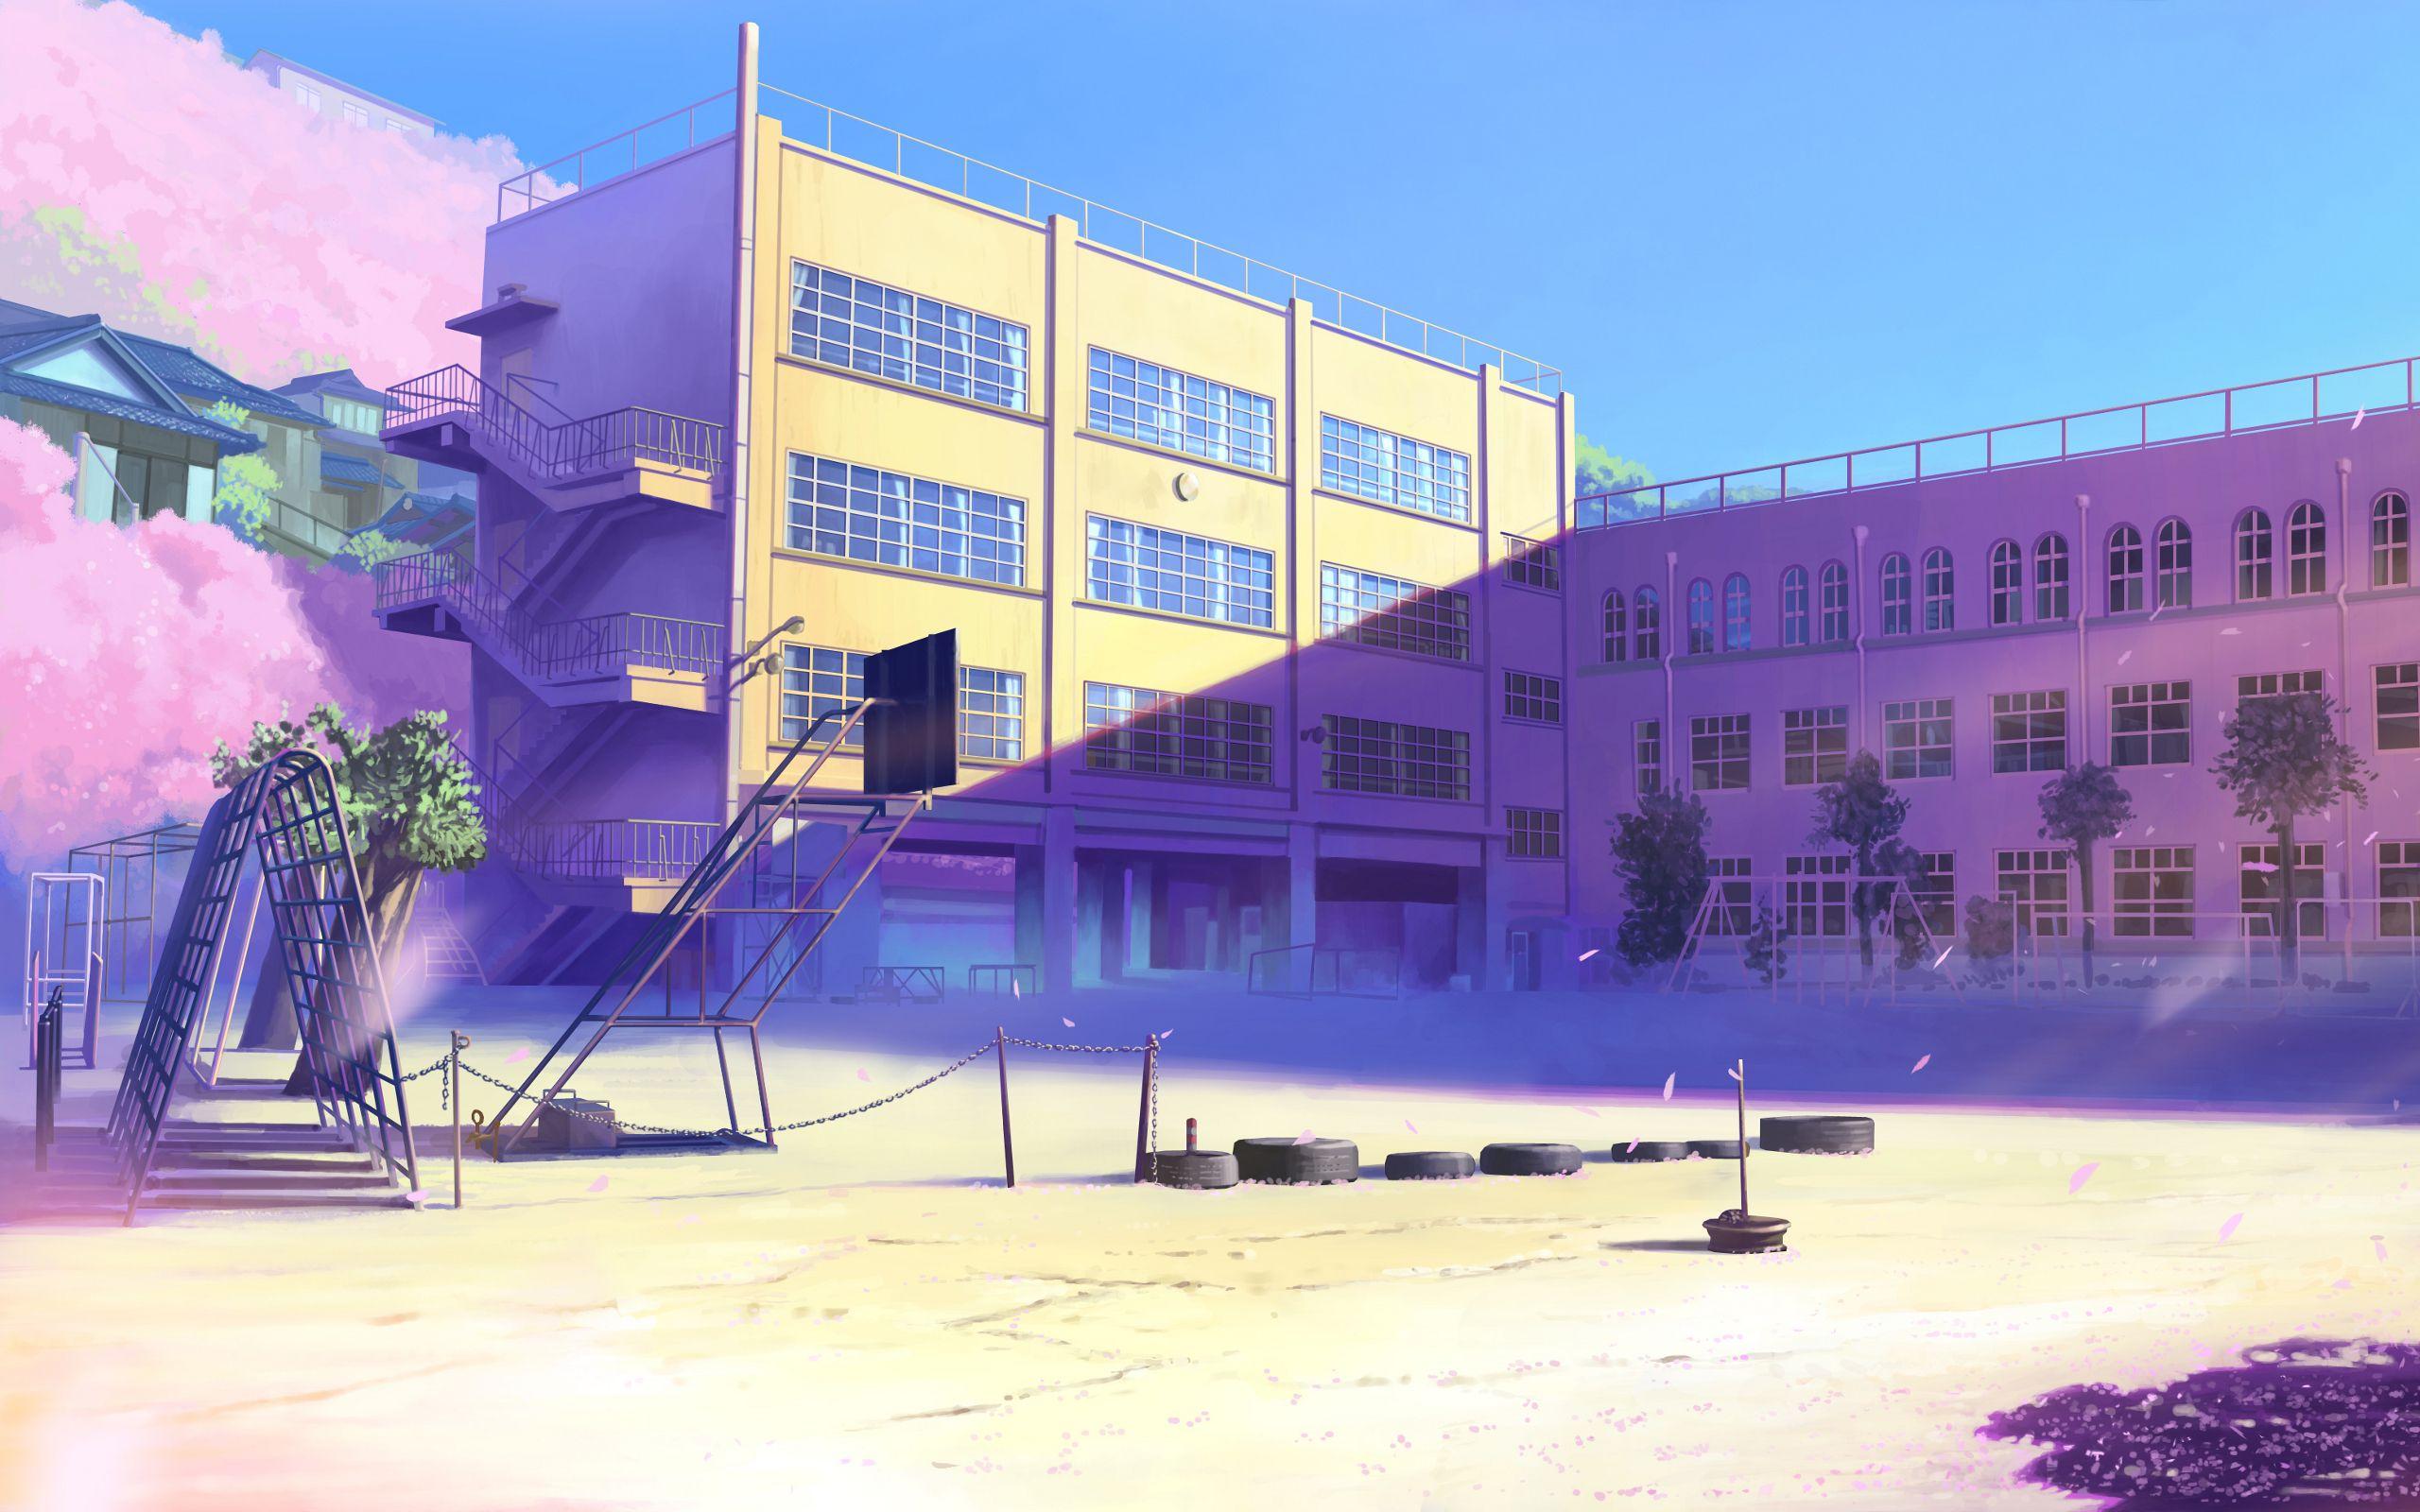 School yard image. Anime scenery, Cool landscapes, Anime background